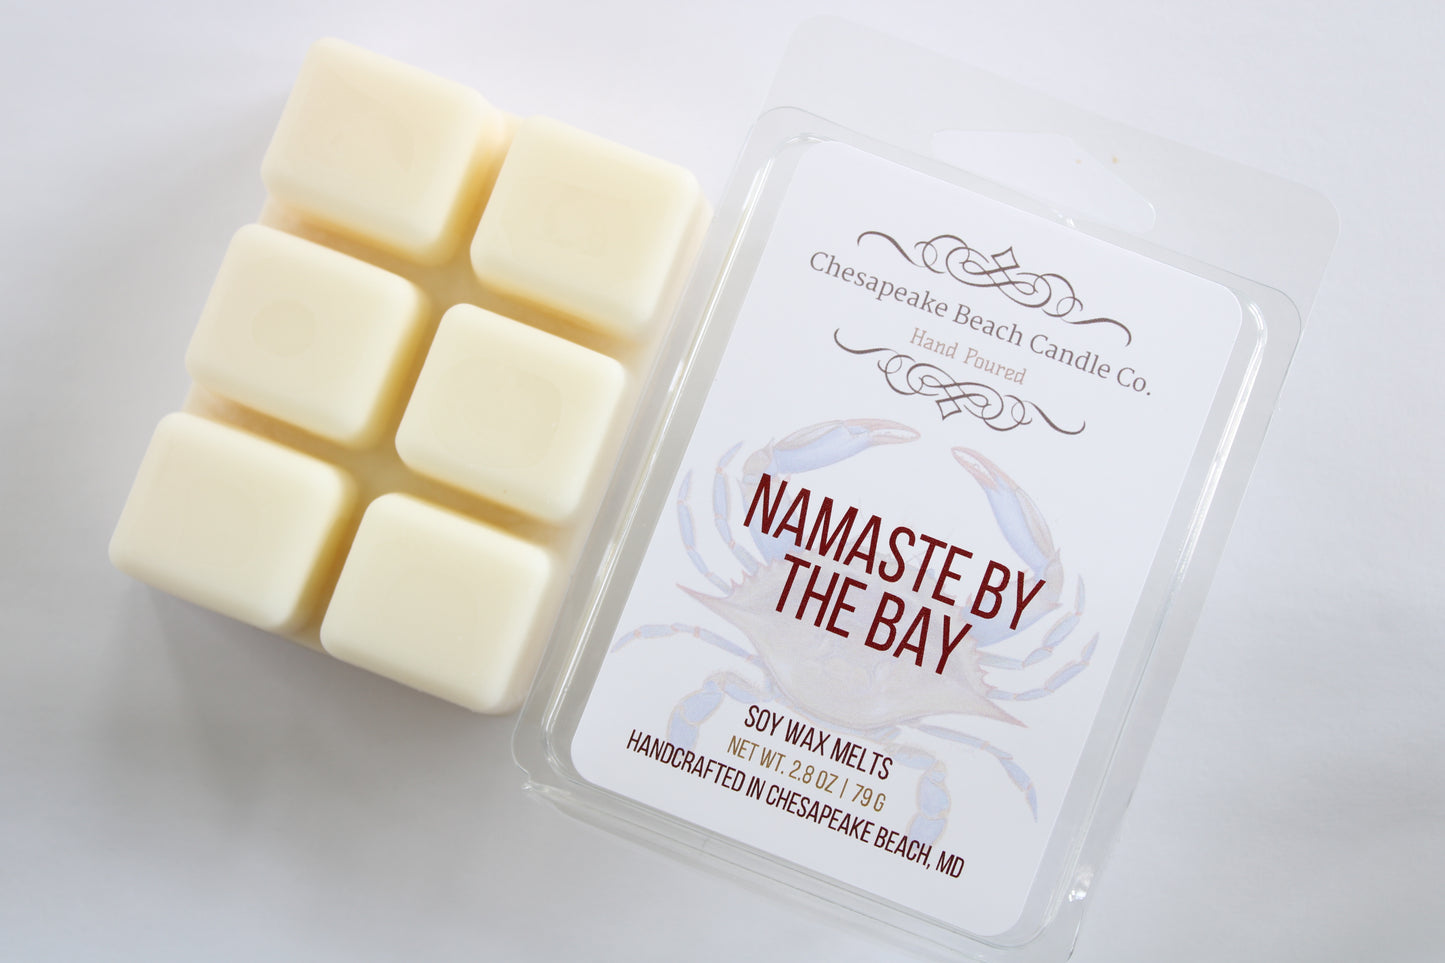 Namaste by the Bay Wax Melts